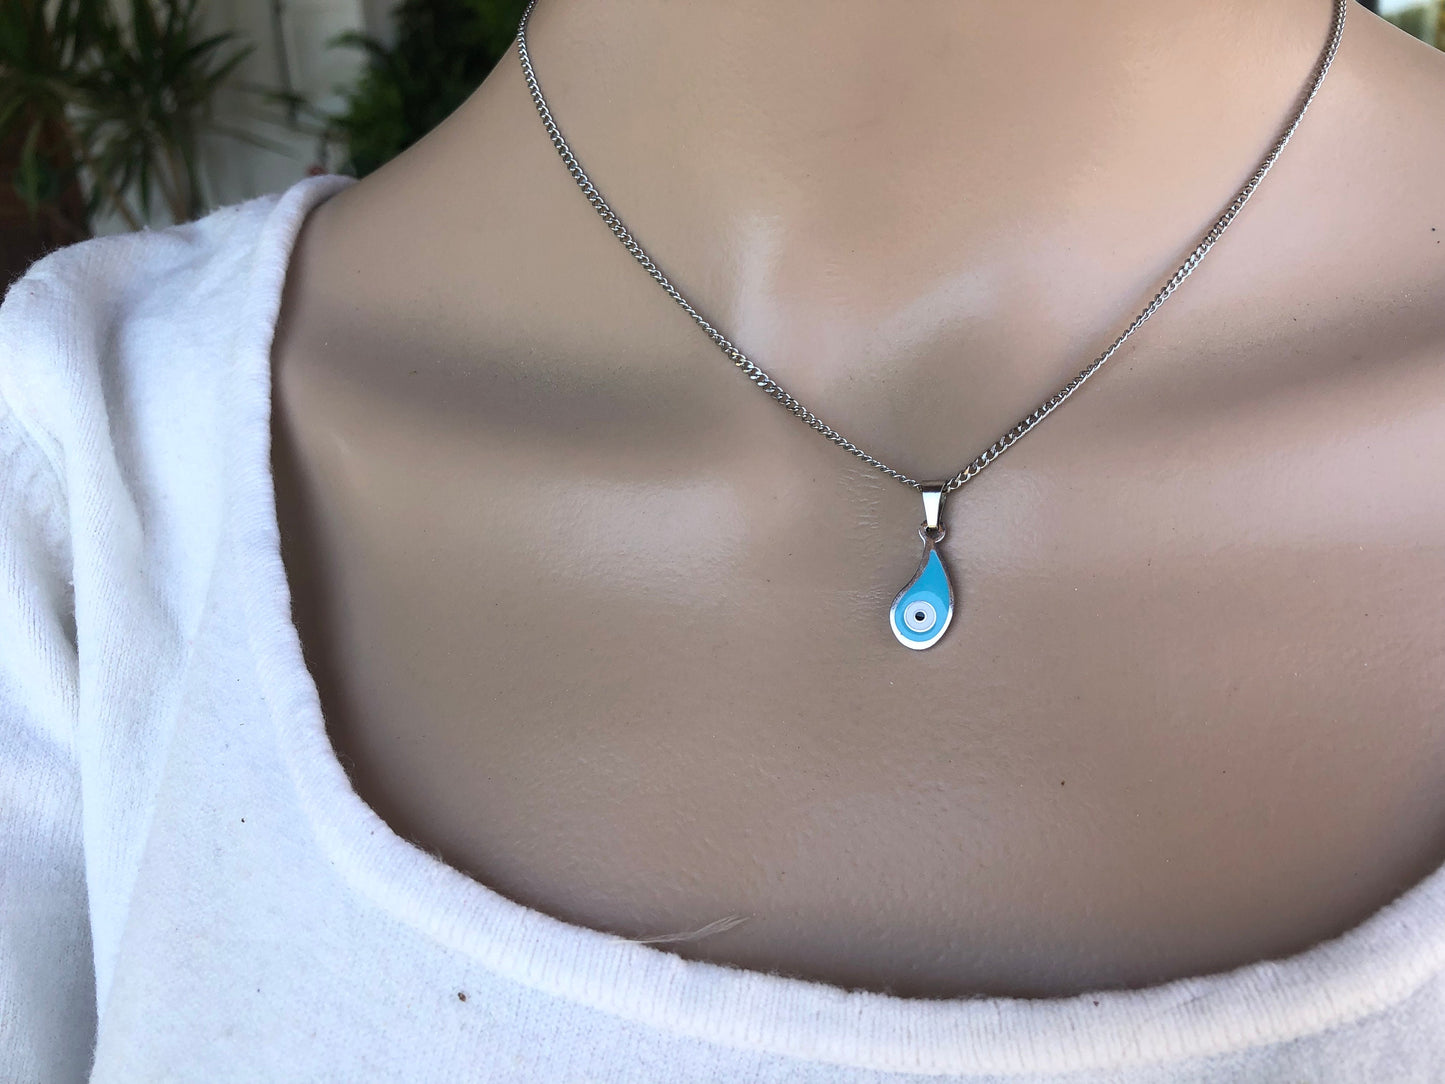 Enamel evil eye drop Necklace - Stainless jewelry - Gift for her - Tiny jewelry